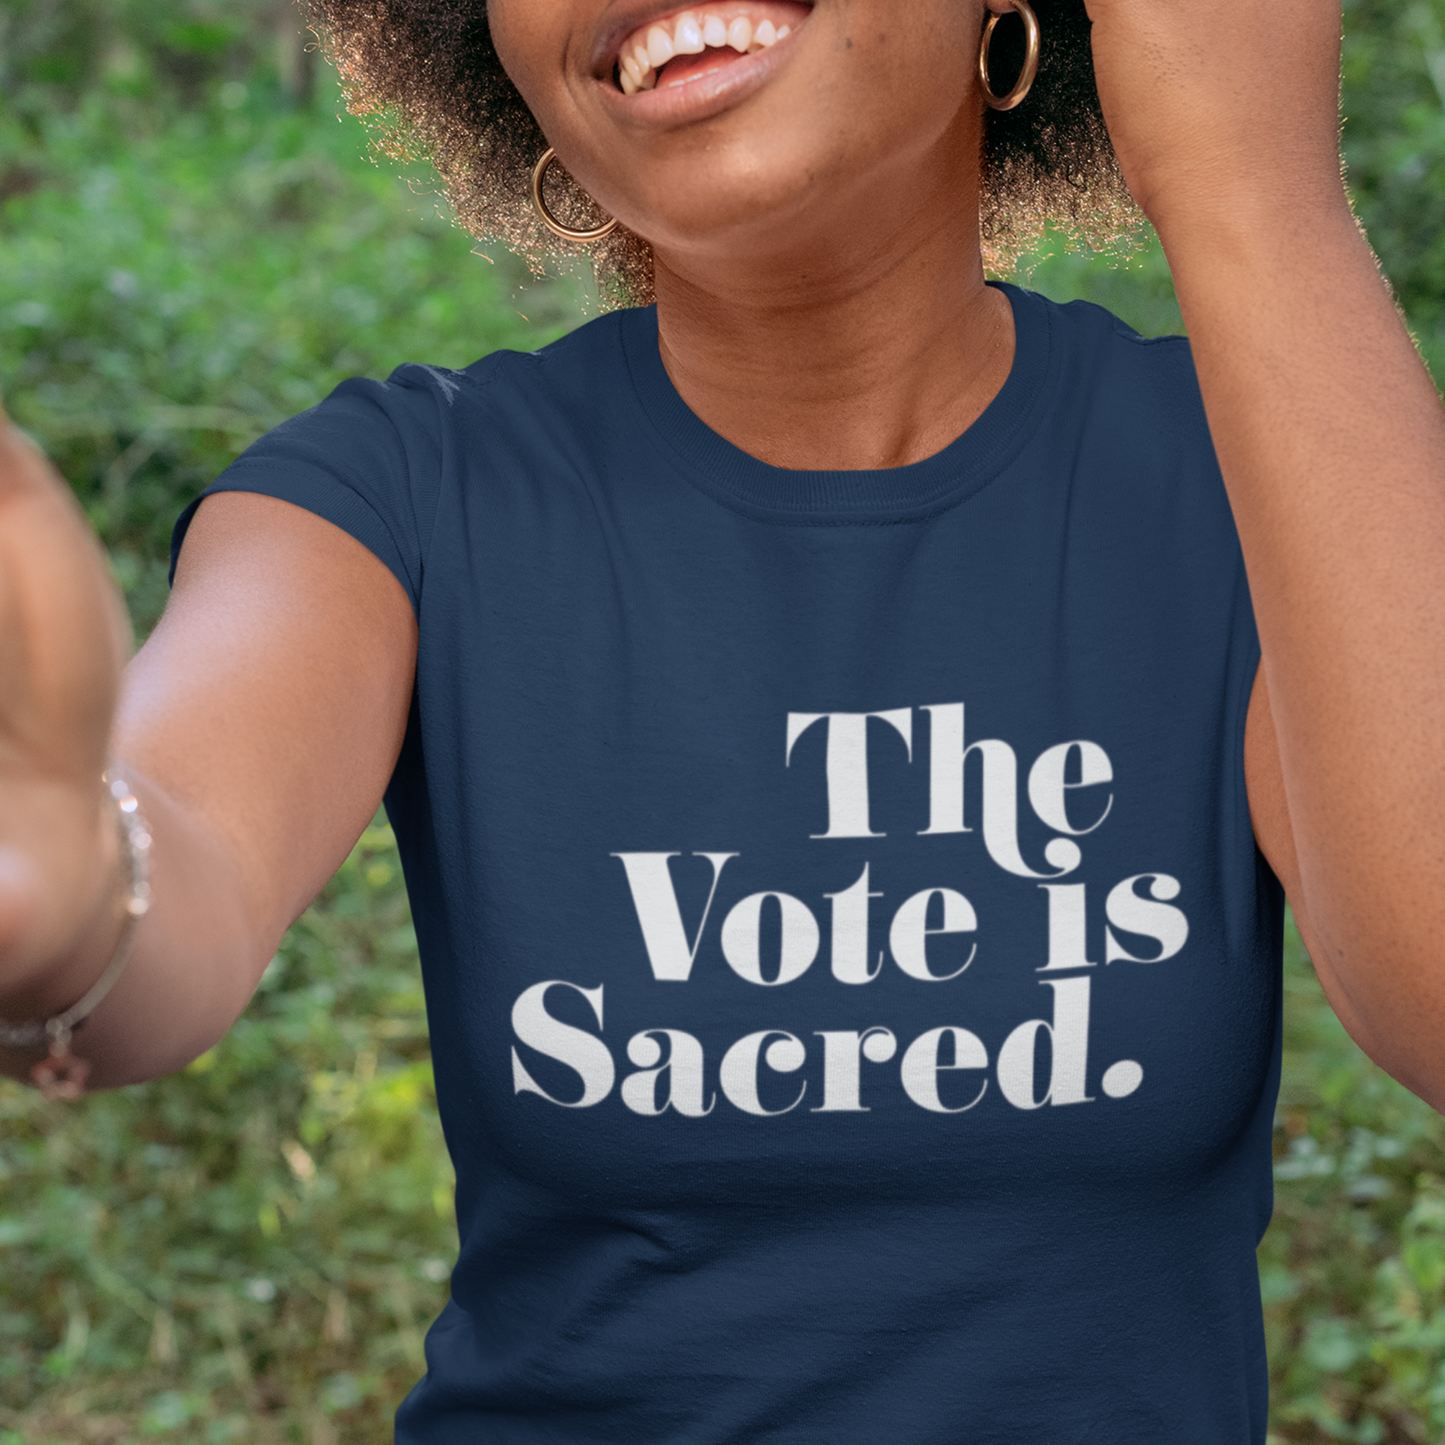 The Vote is Sacred T-Shirt